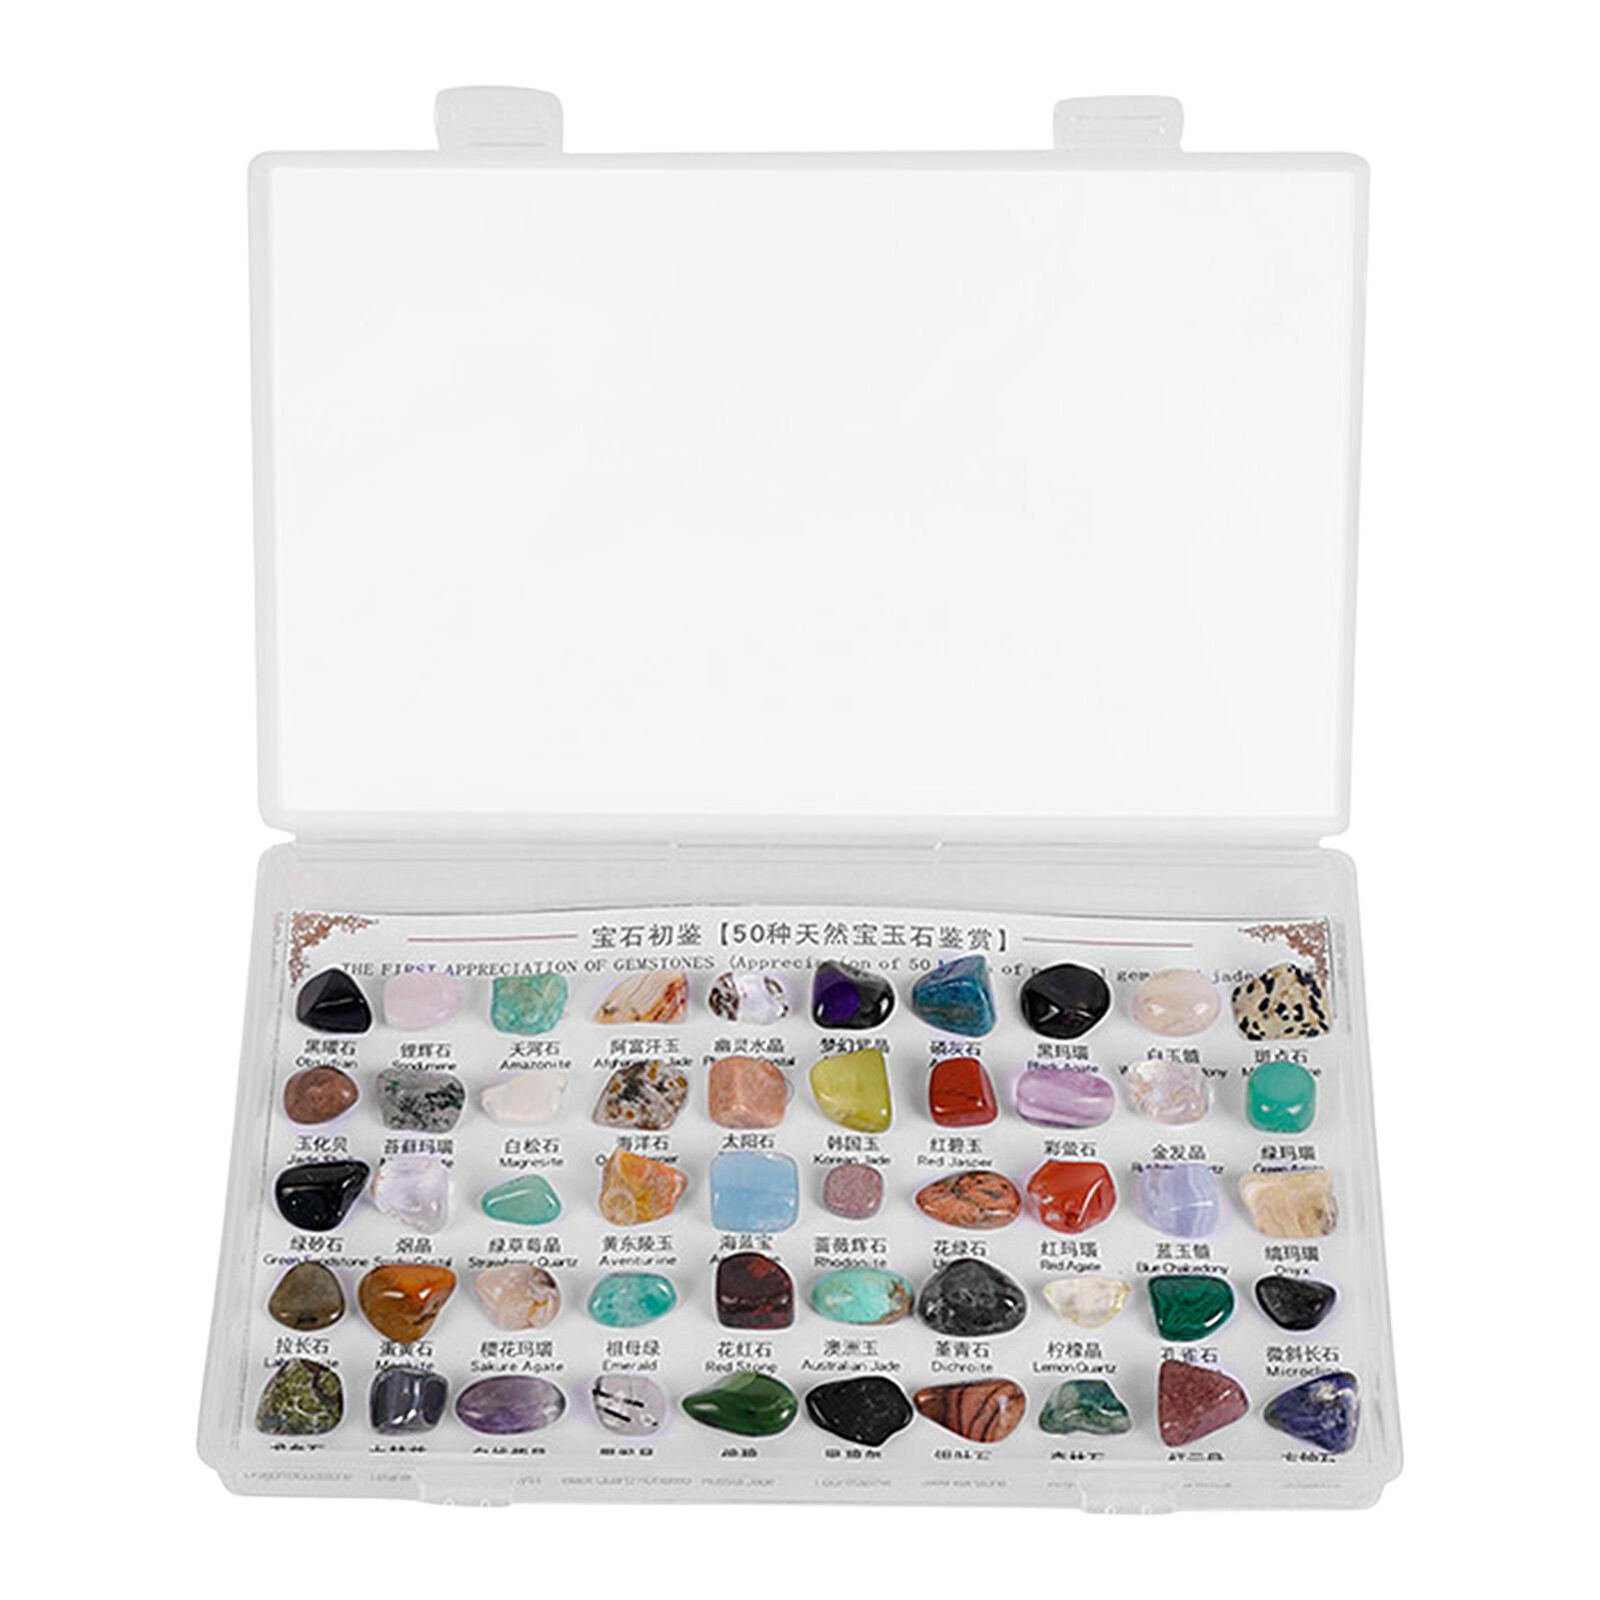 Rock Collection Box For Kids Natural Gemstone Crystal Sets Educational Toys